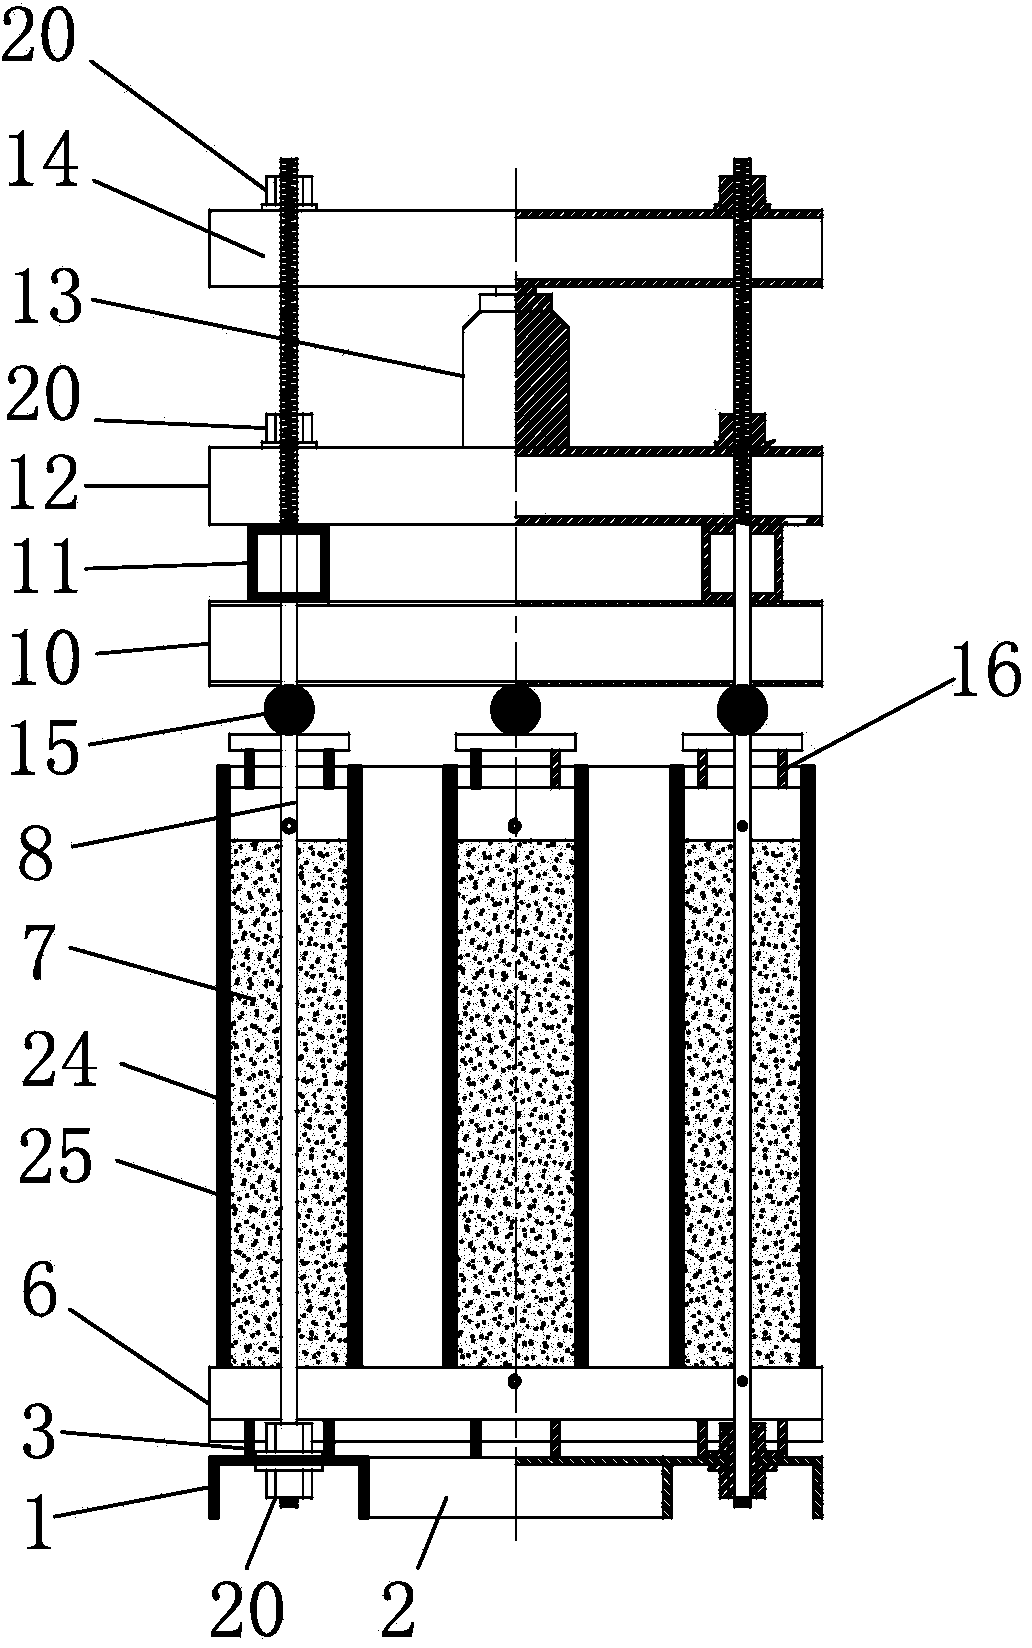 Shield segment erosion test device under chlorine salt environment and load coupling effects